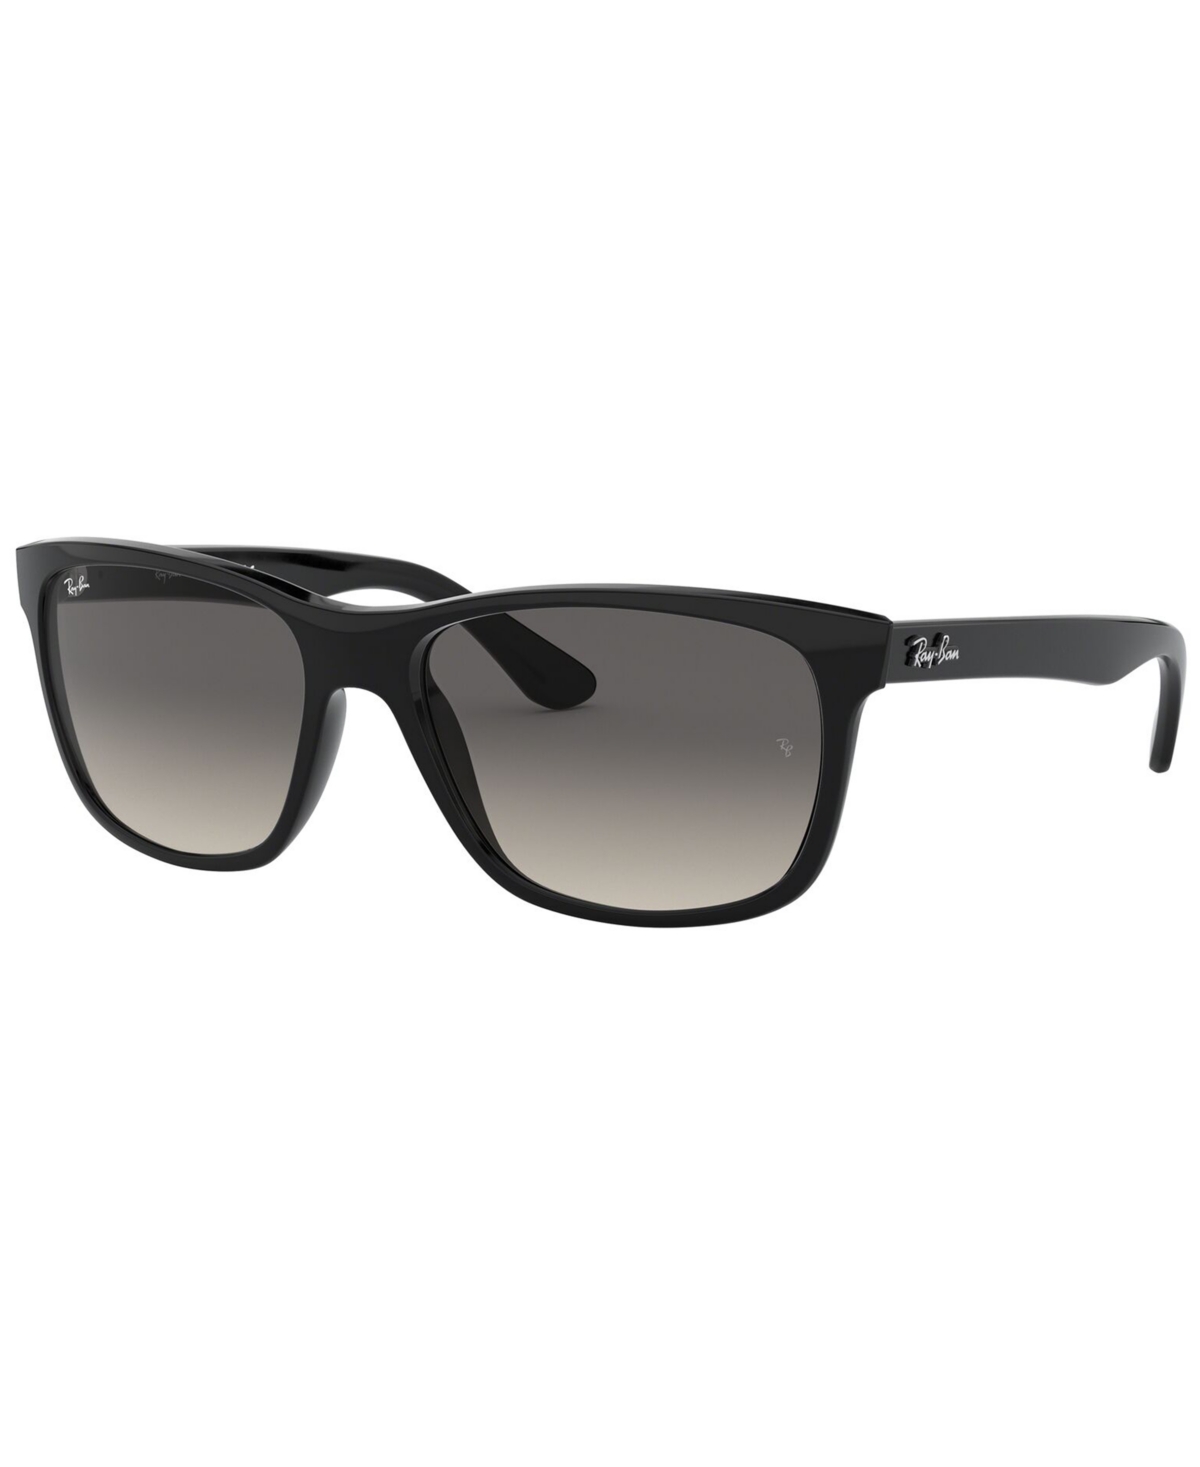 Ray Ban Sunglasses, Rb4181 In Black,grey